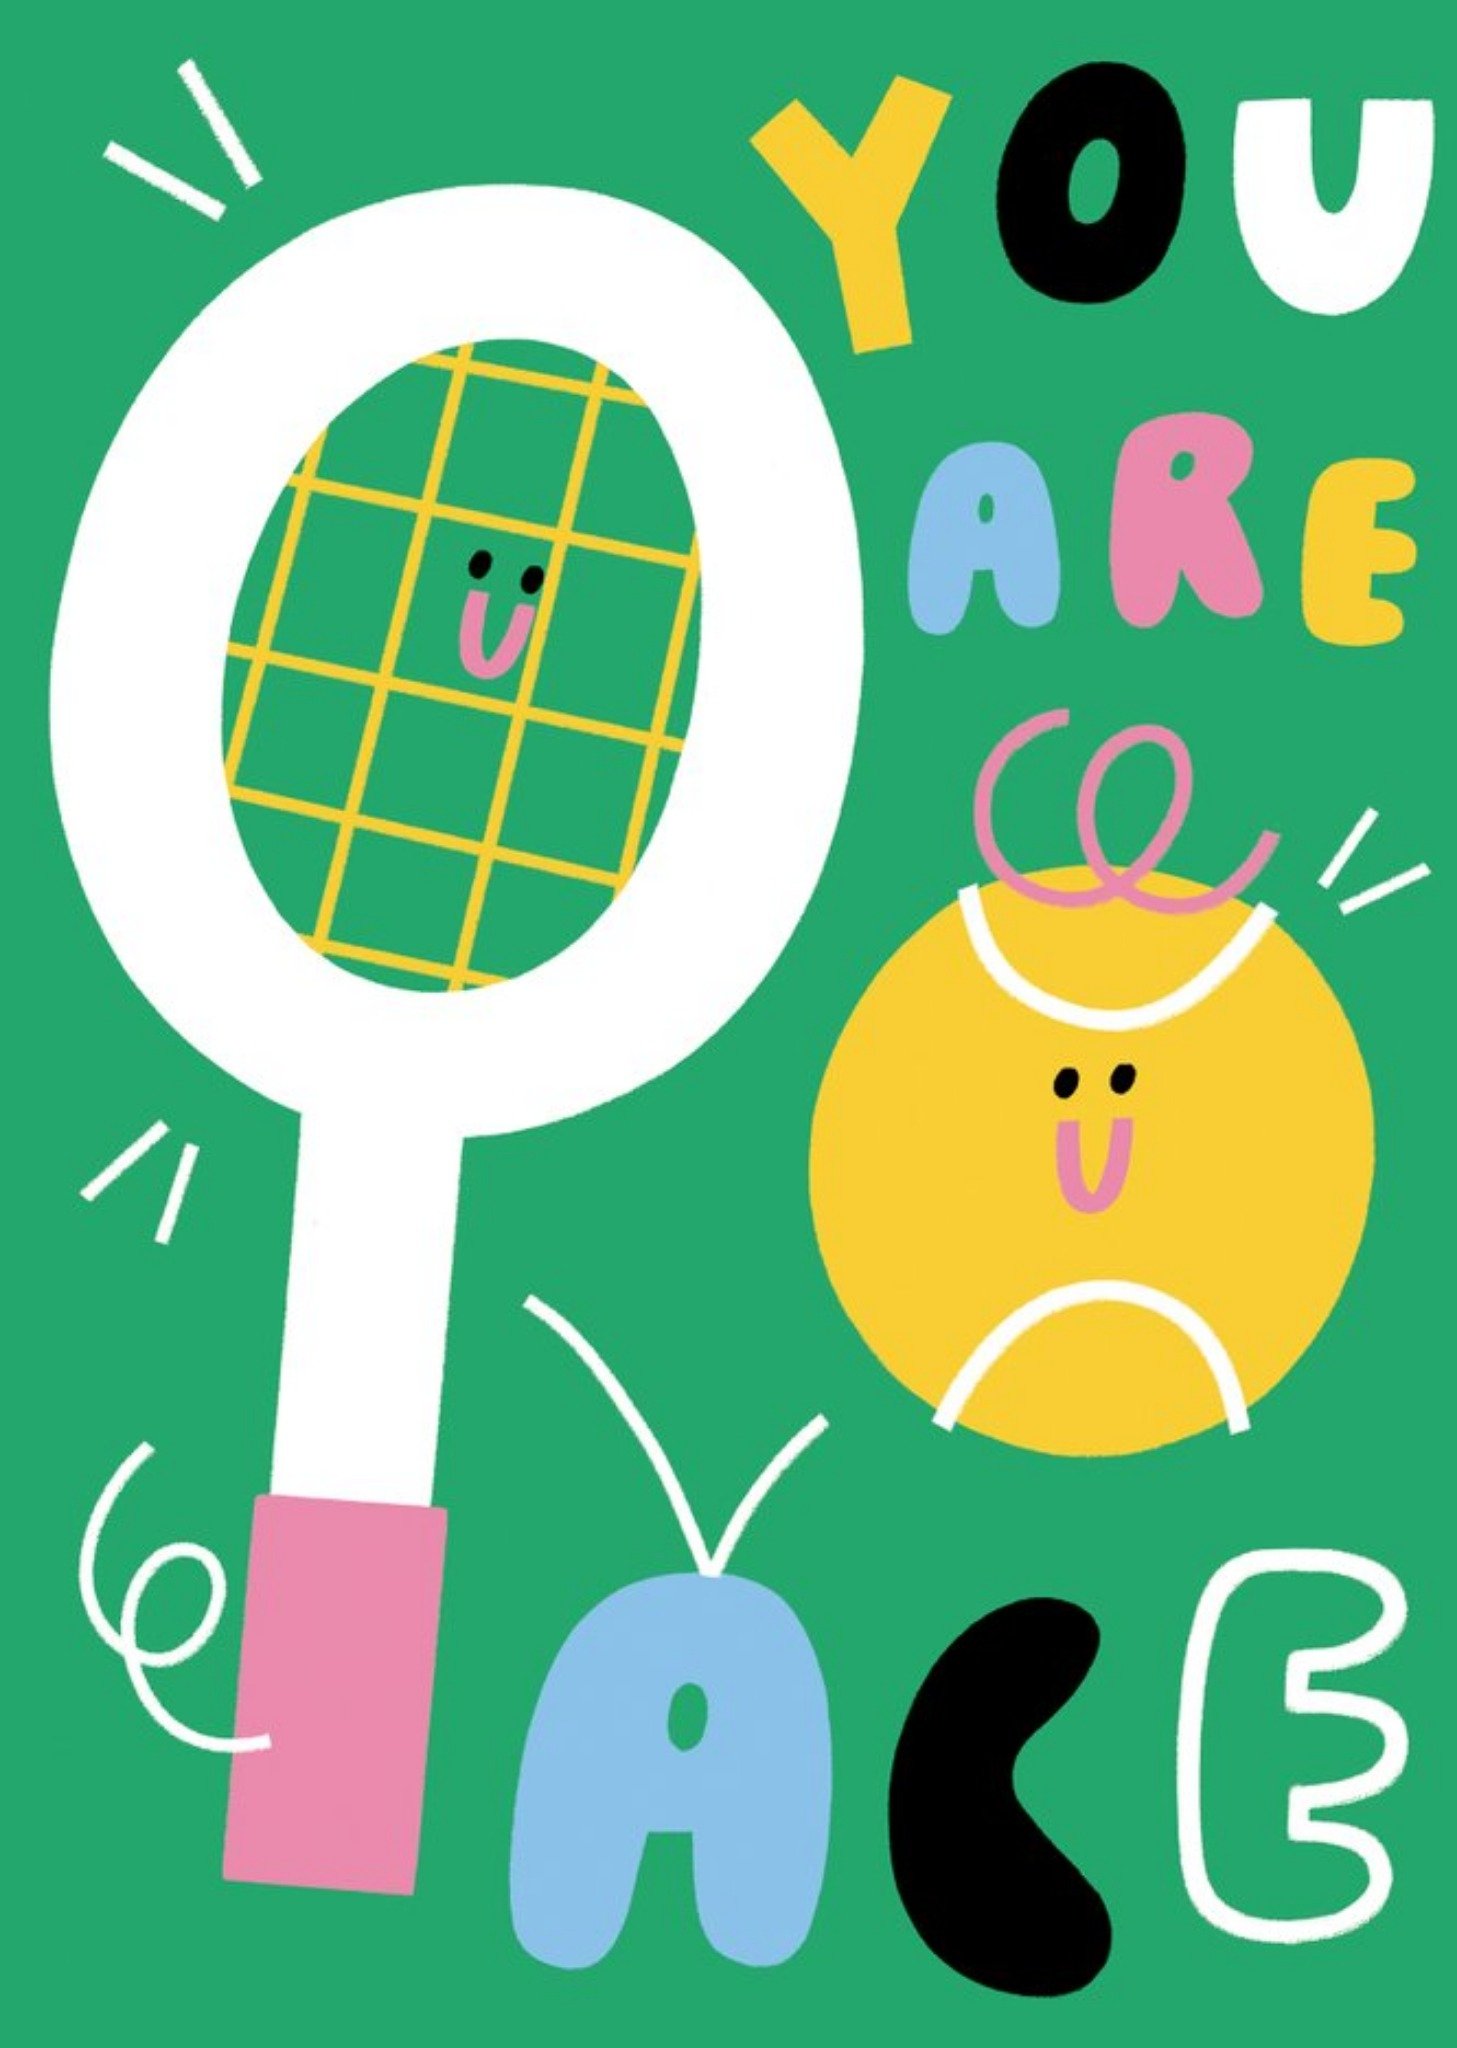 Friends Rumble Cards Illustration Tennis Funny Ace Birthday Card Ecard